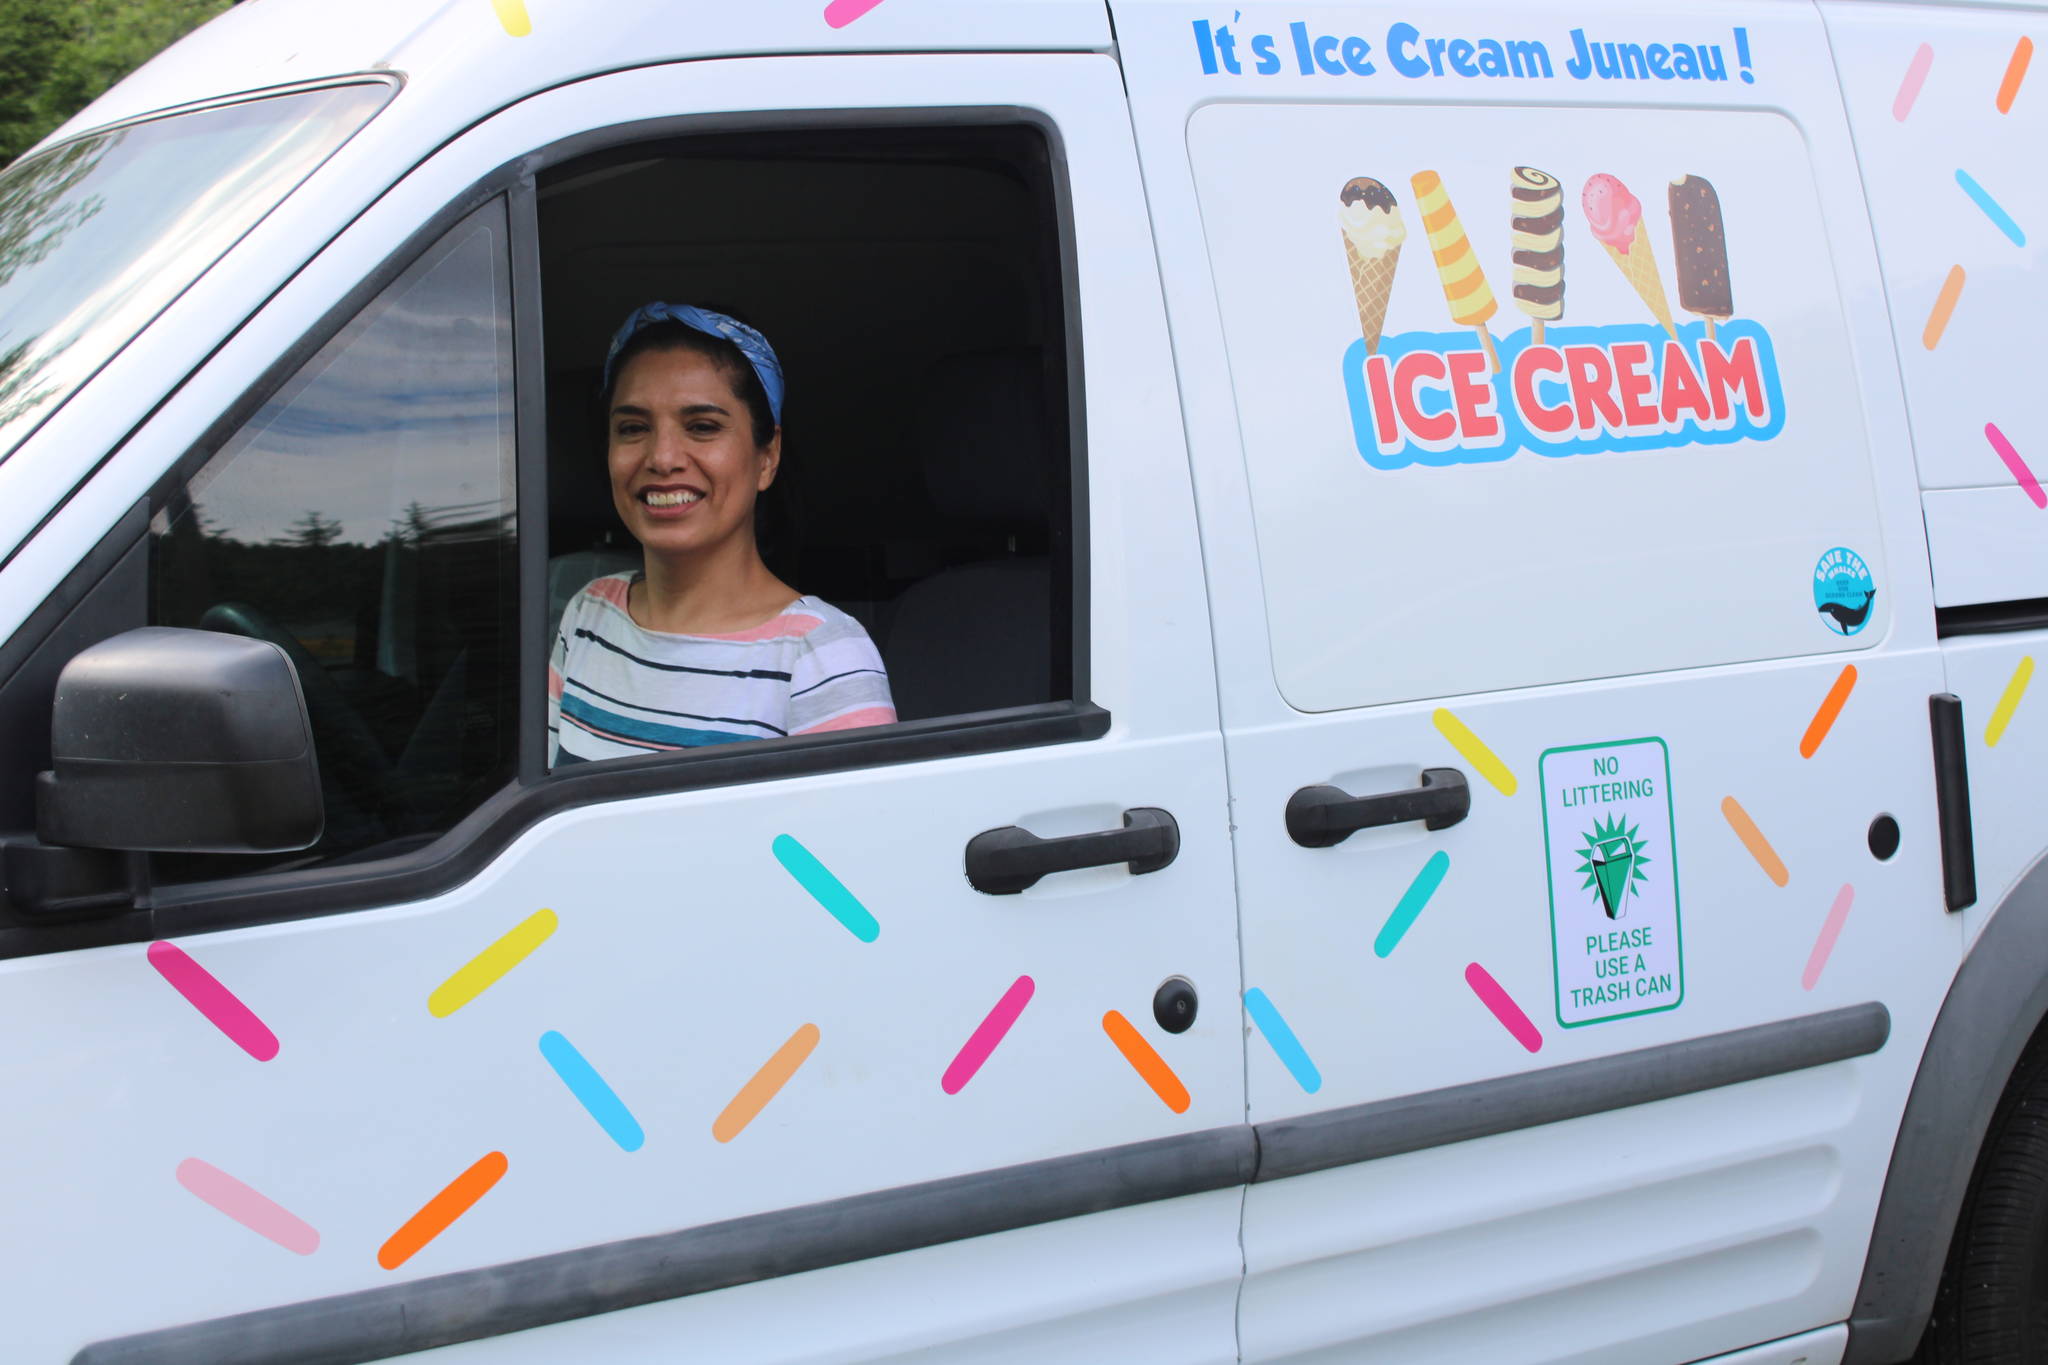 Cathy Mendoza sits in the driver’s seat of her ice cream truck on July 18. She recently launched the ice cream truck business in Juneau. She said that despite the concept being new to Juneau, sales have been brisk. (Dana Zigmund/Juneau Empire)